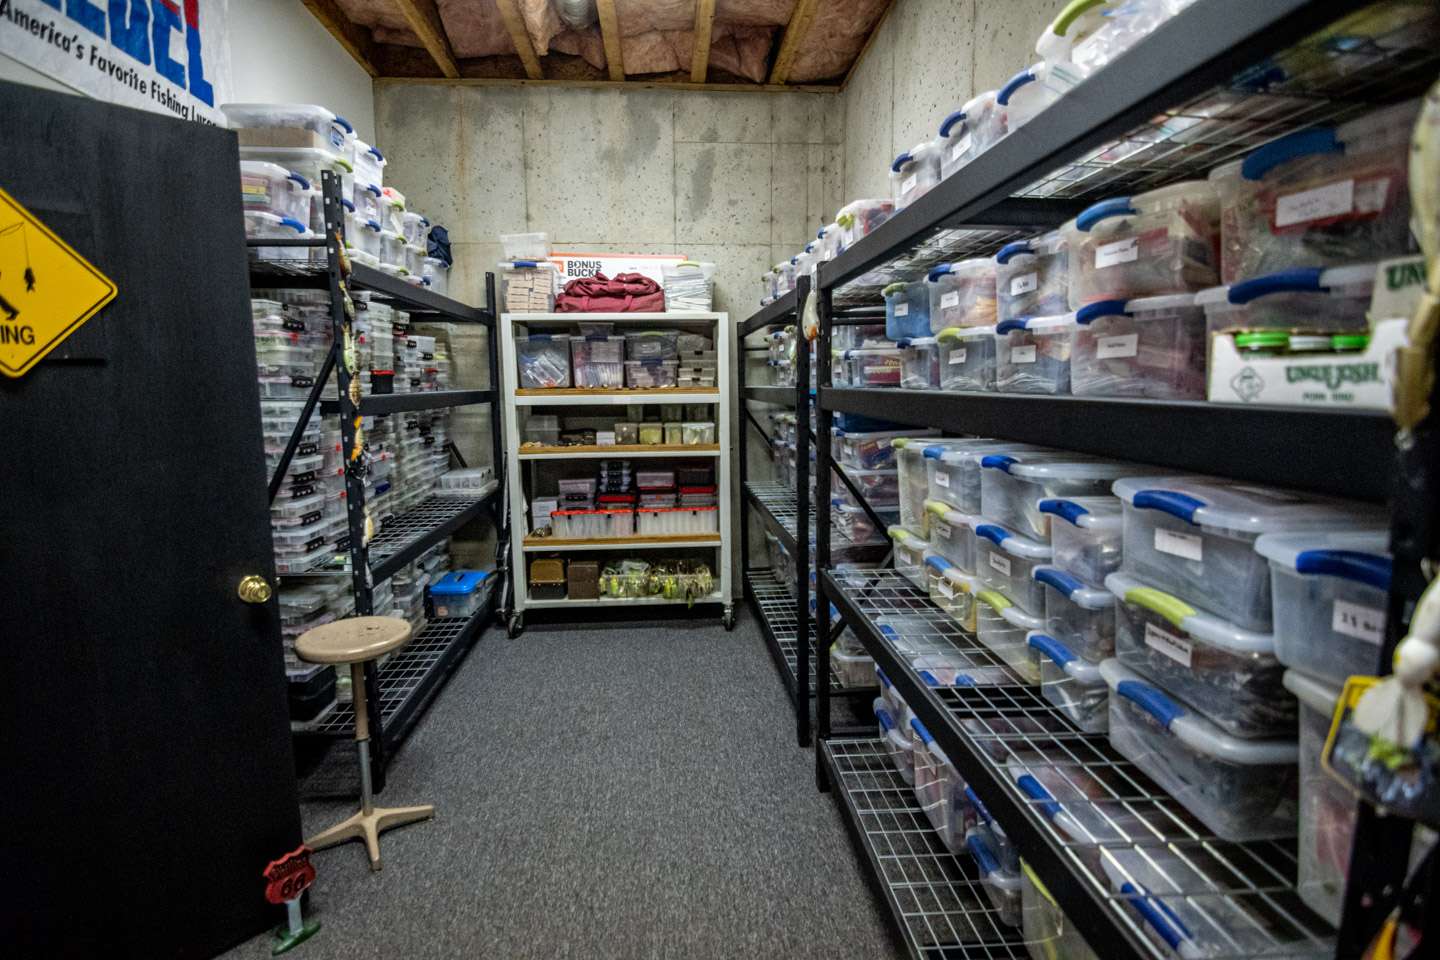 The other half of the tournament tackle room has metal shelving for his Tupperware boxes full of baits. 